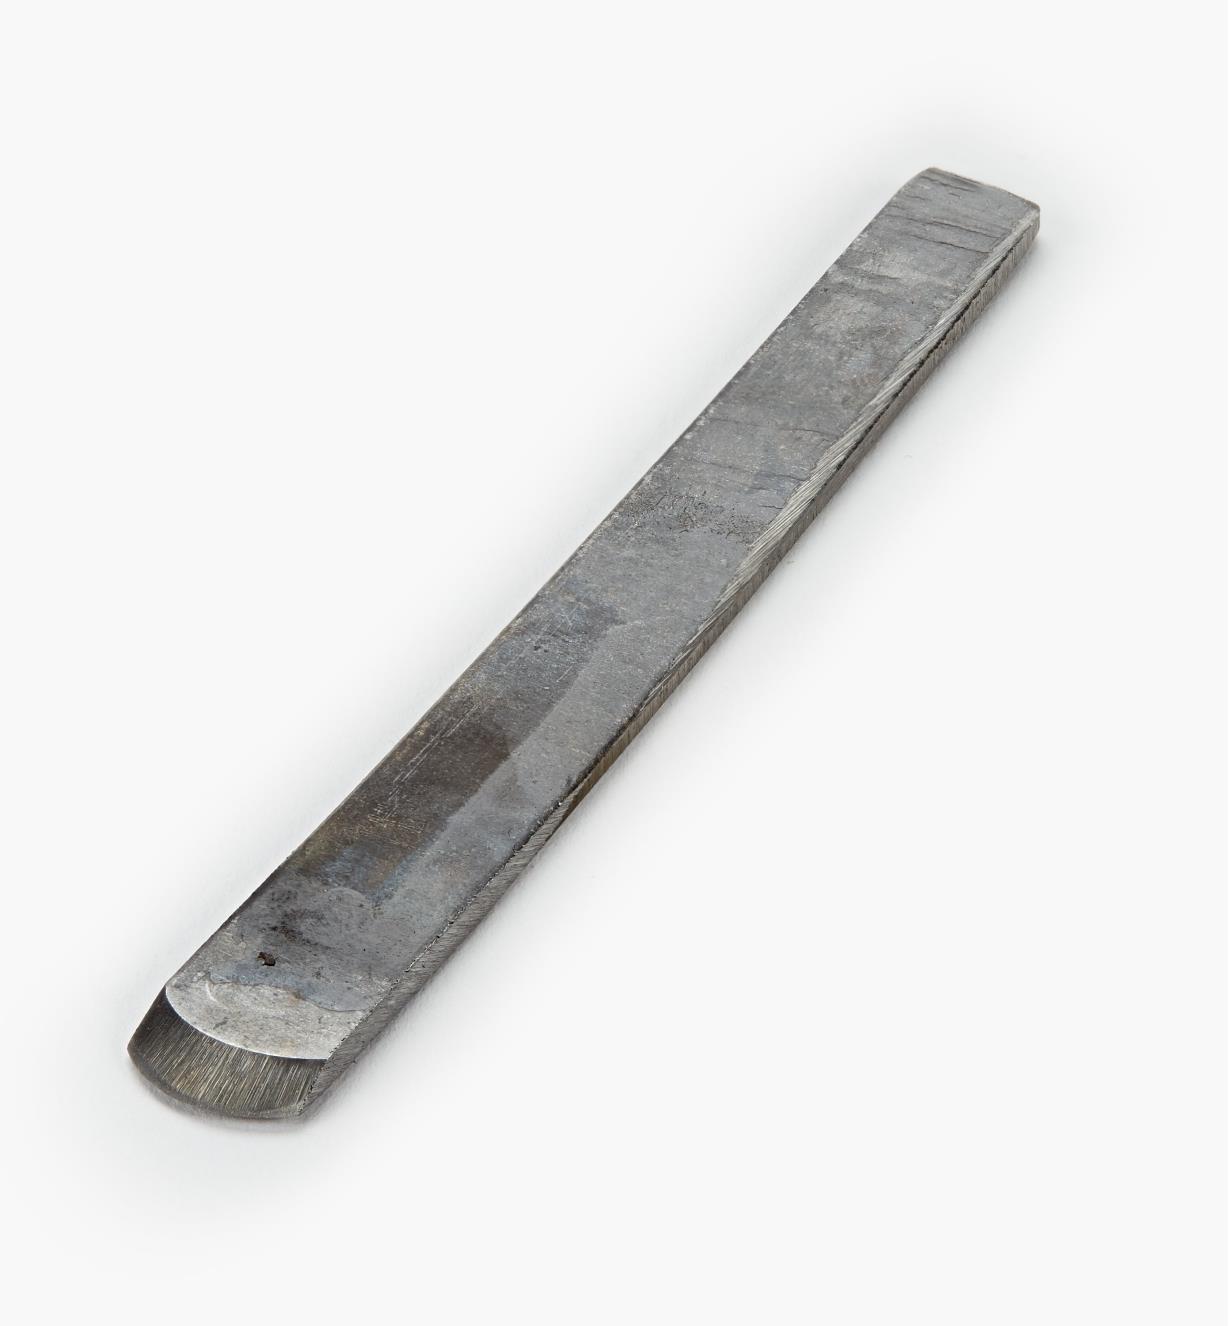 07P1612 - Replacement Blade for 13mm Round Plane